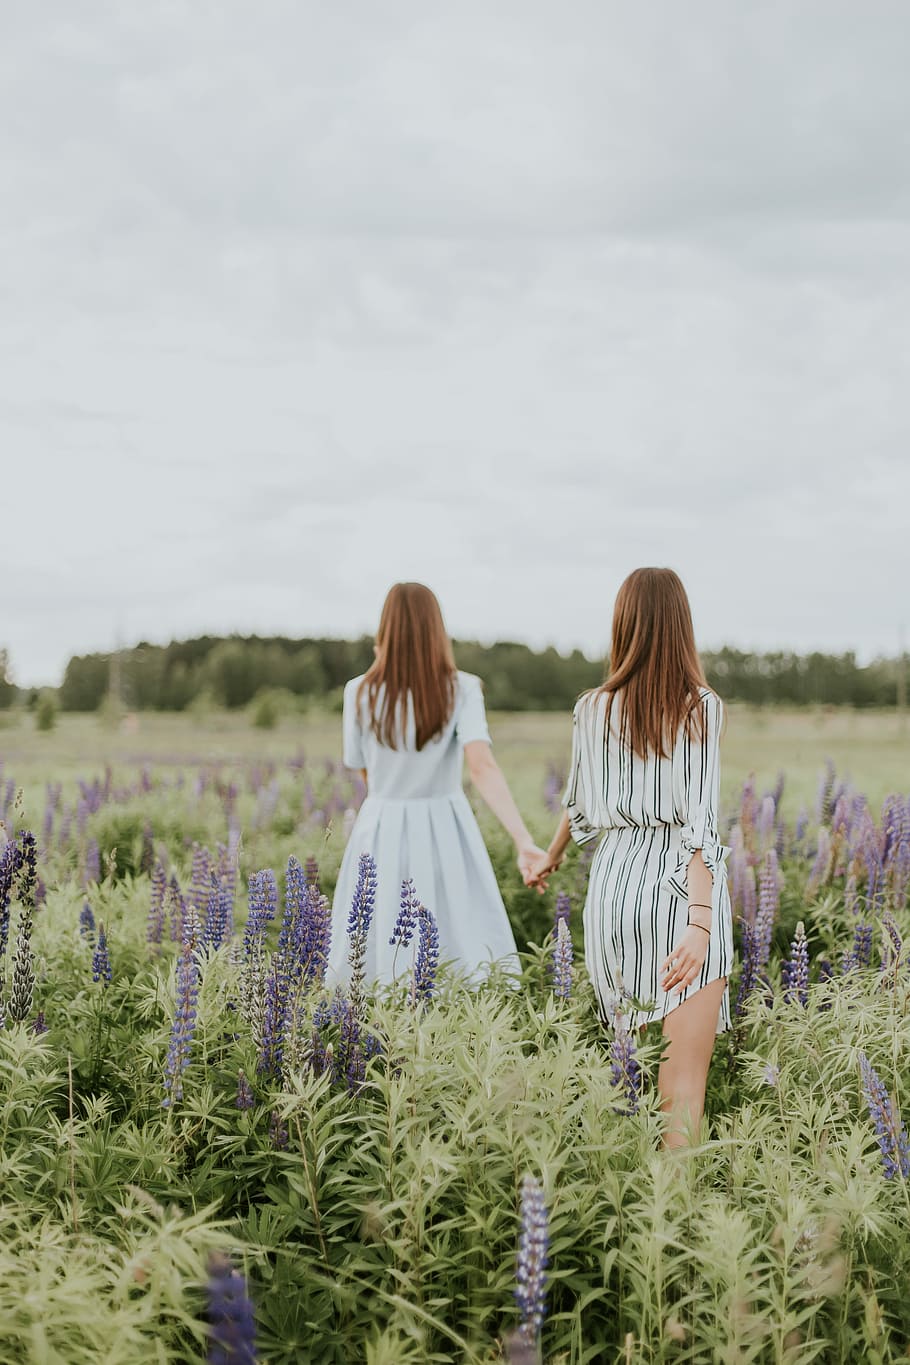 two women surrounded by lavender under nimbus clouds, two women walking in lavender flower field while holding hands at daytime, HD wallpaper